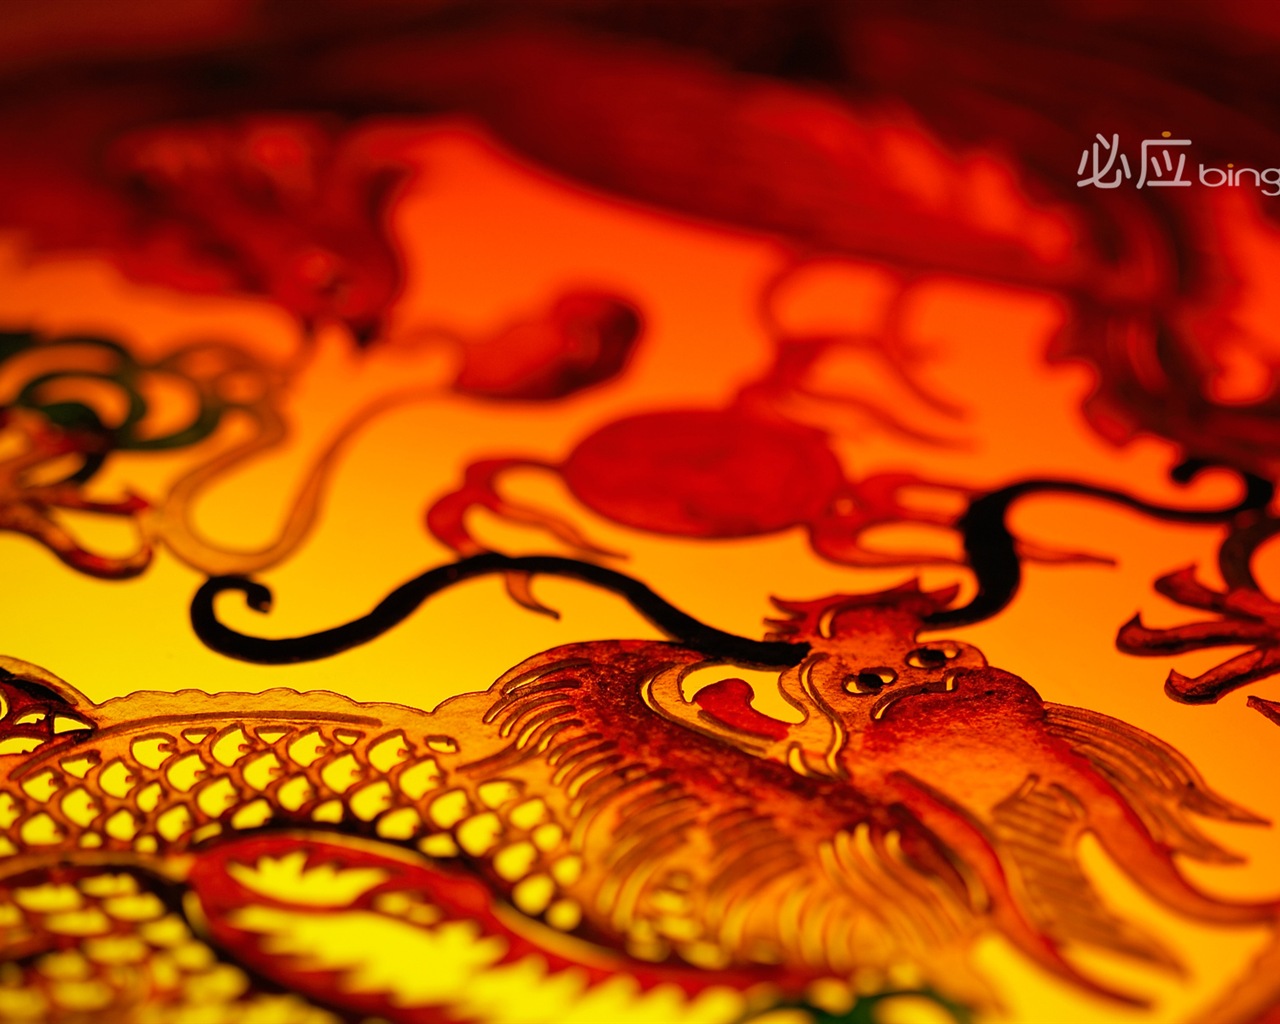 Bing selection best HD wallpapers: China theme wallpaper (2) #12 - 1280x1024